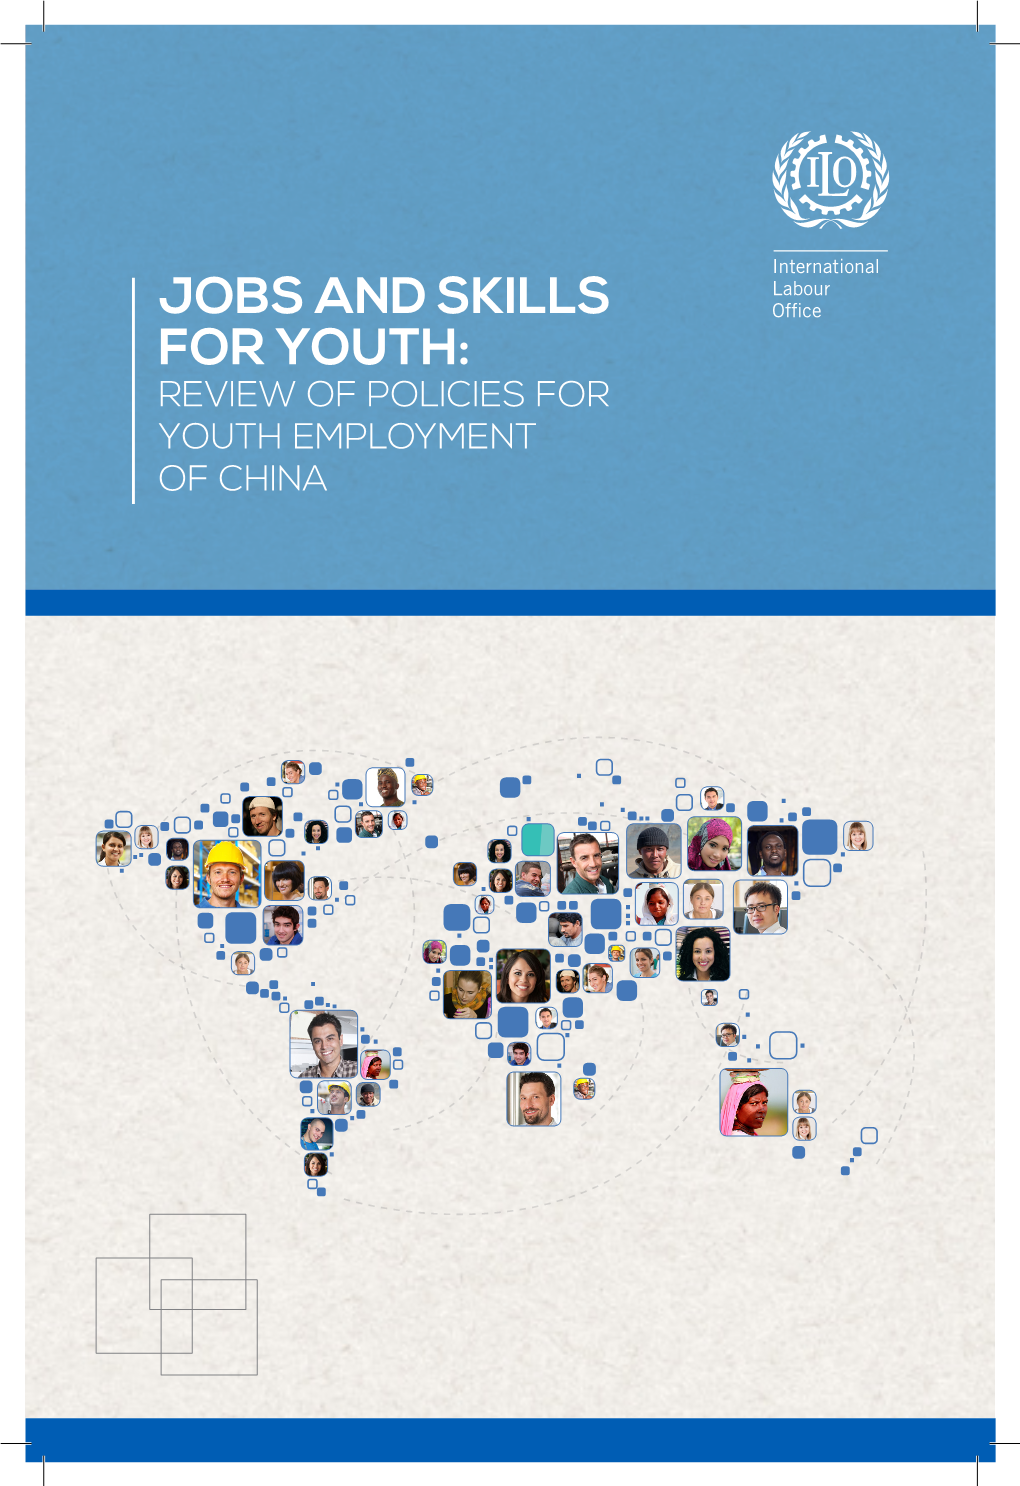 Jobs and Skills for Youth: Review of Policies for Youth Employment of China